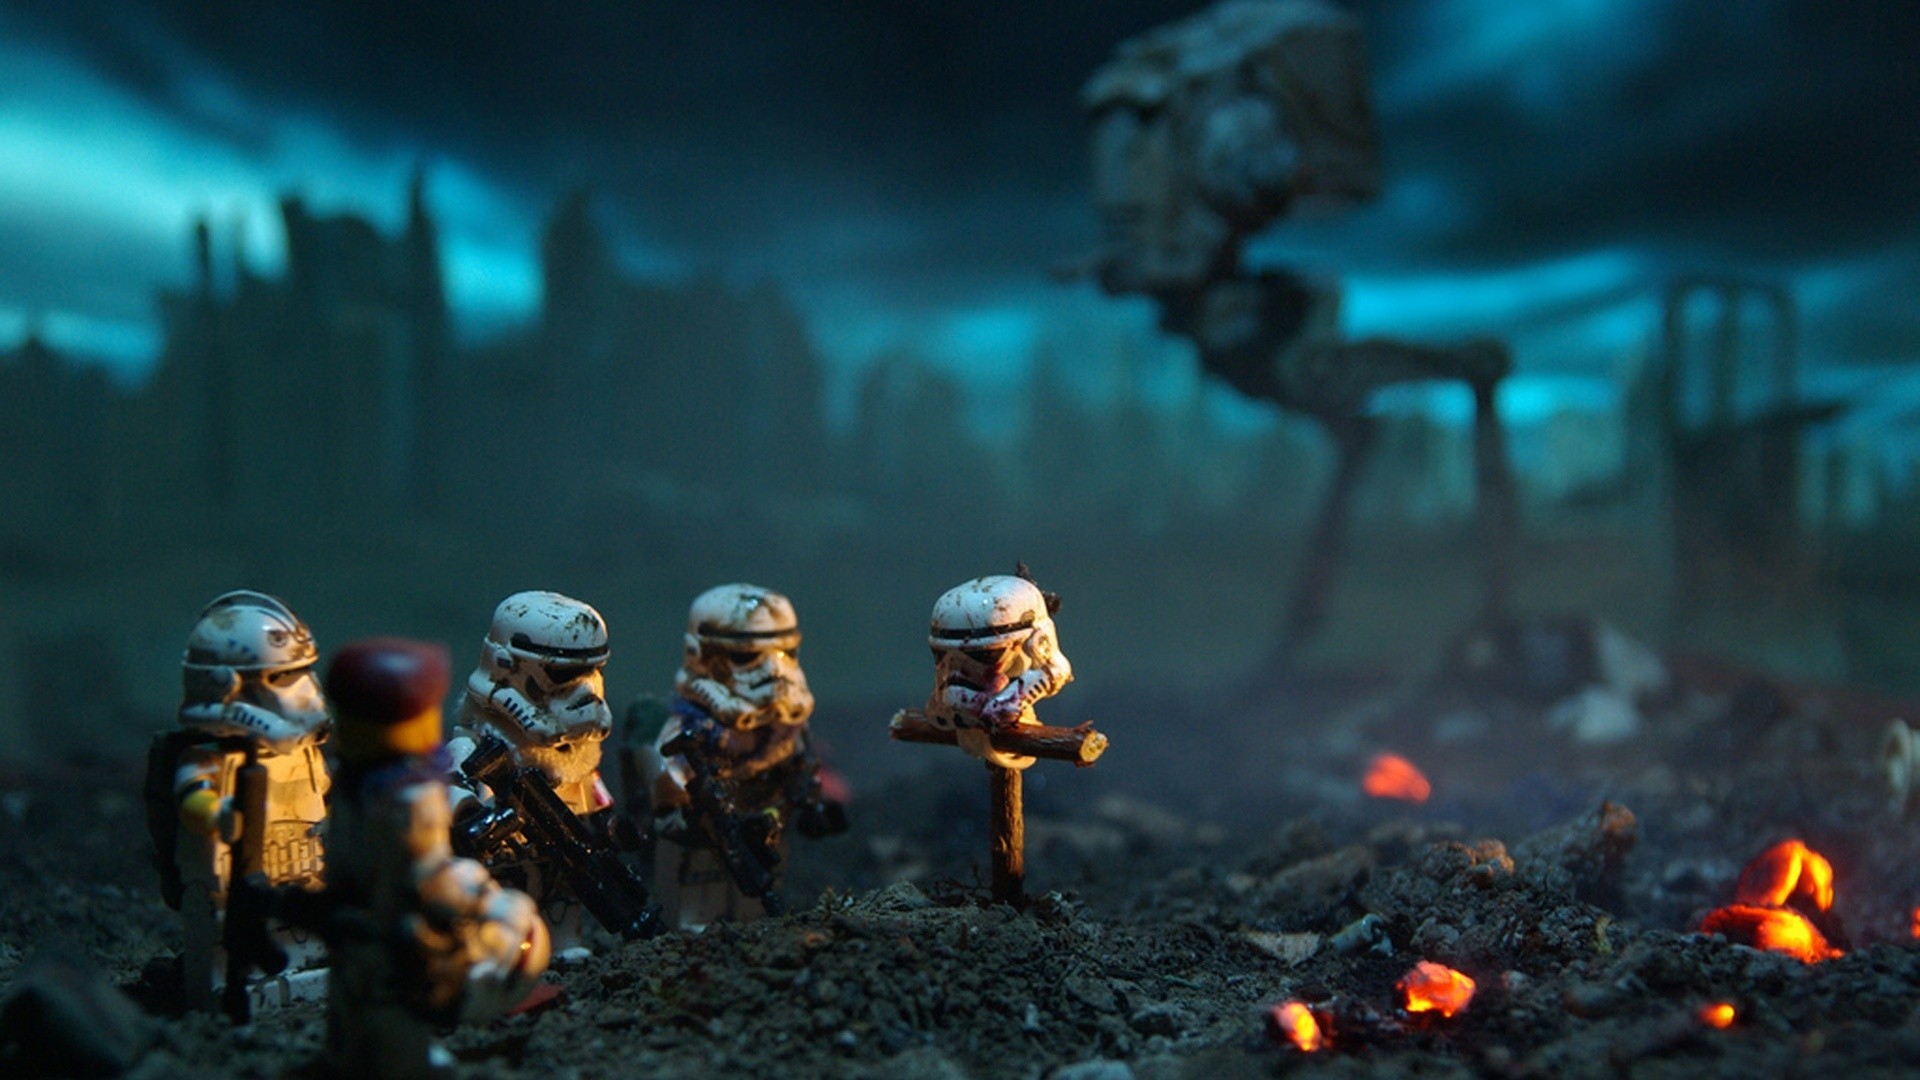 1920x1080 Star Wars Lego Cool Pictures HD Wallpaper Star Wars Lego Cool Pictures